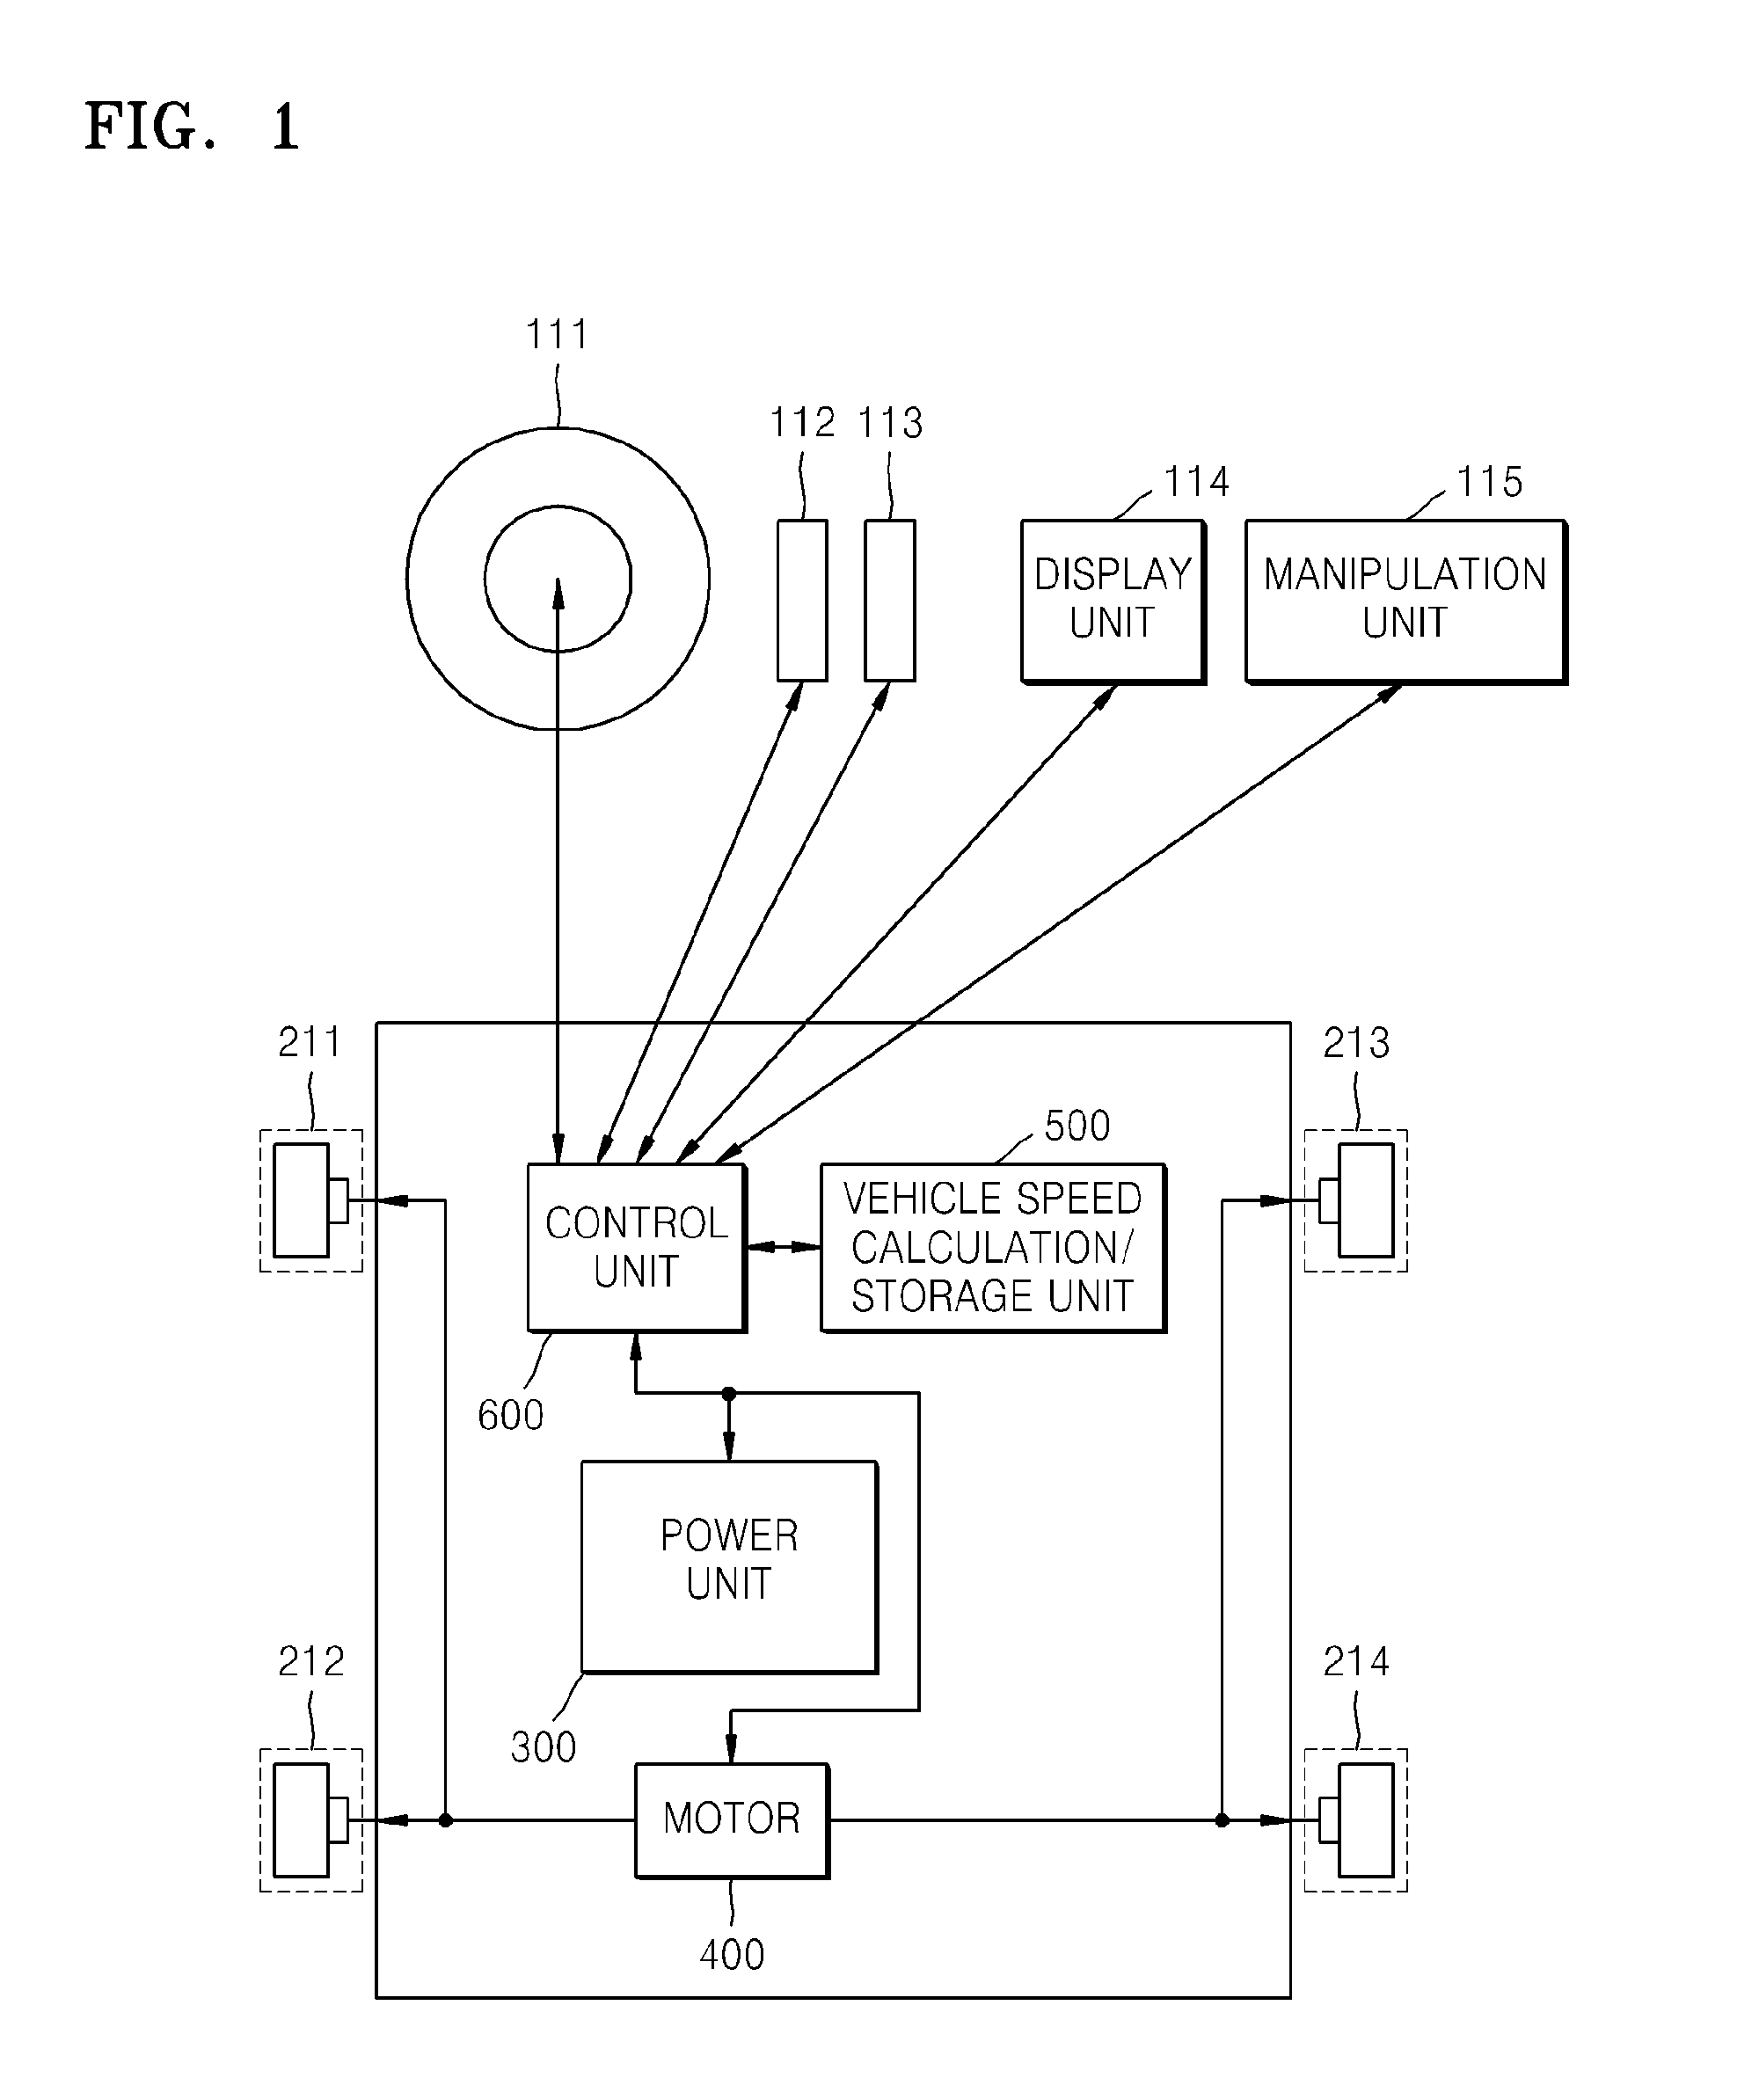 Apparatus and method for driving vehicle